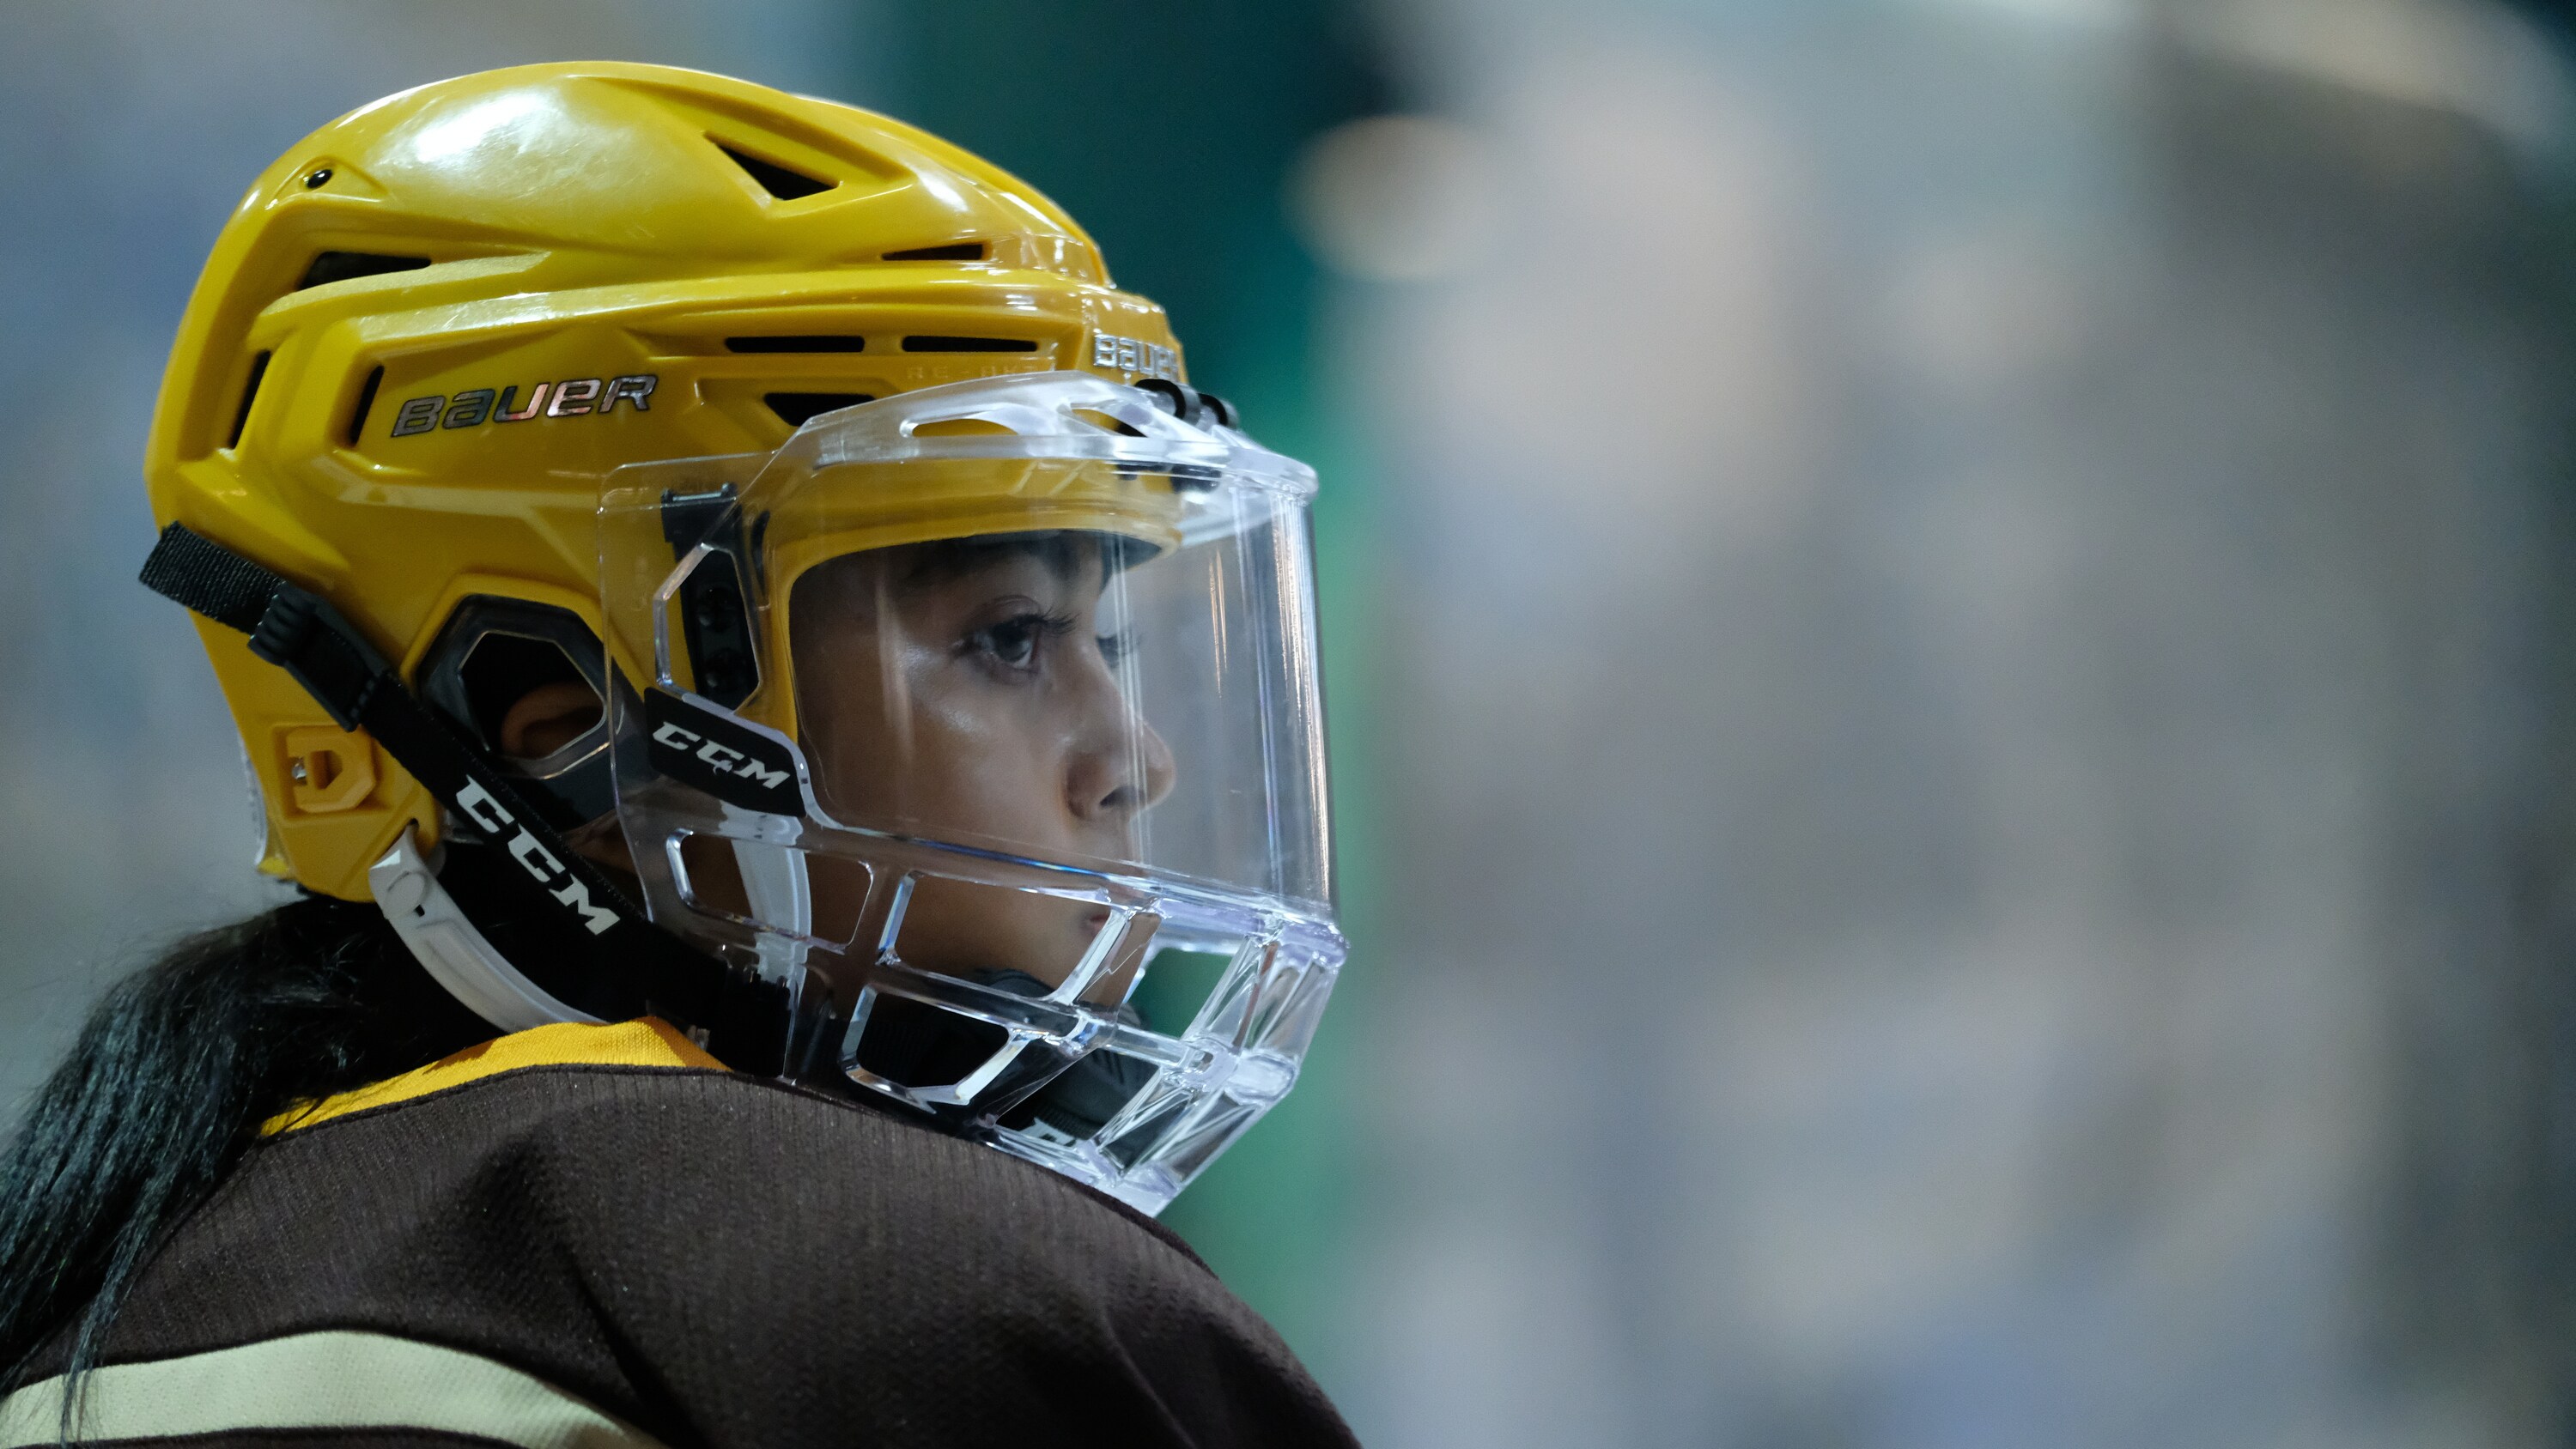 THE MIGHTY DUCKS: GAME CHANGERS - "Change on the Fly" - With the State Tournament on the horizon, Alex realizes she likes winning more than she thought. (Disney/Liane Hentscher) LUKE ISLAM